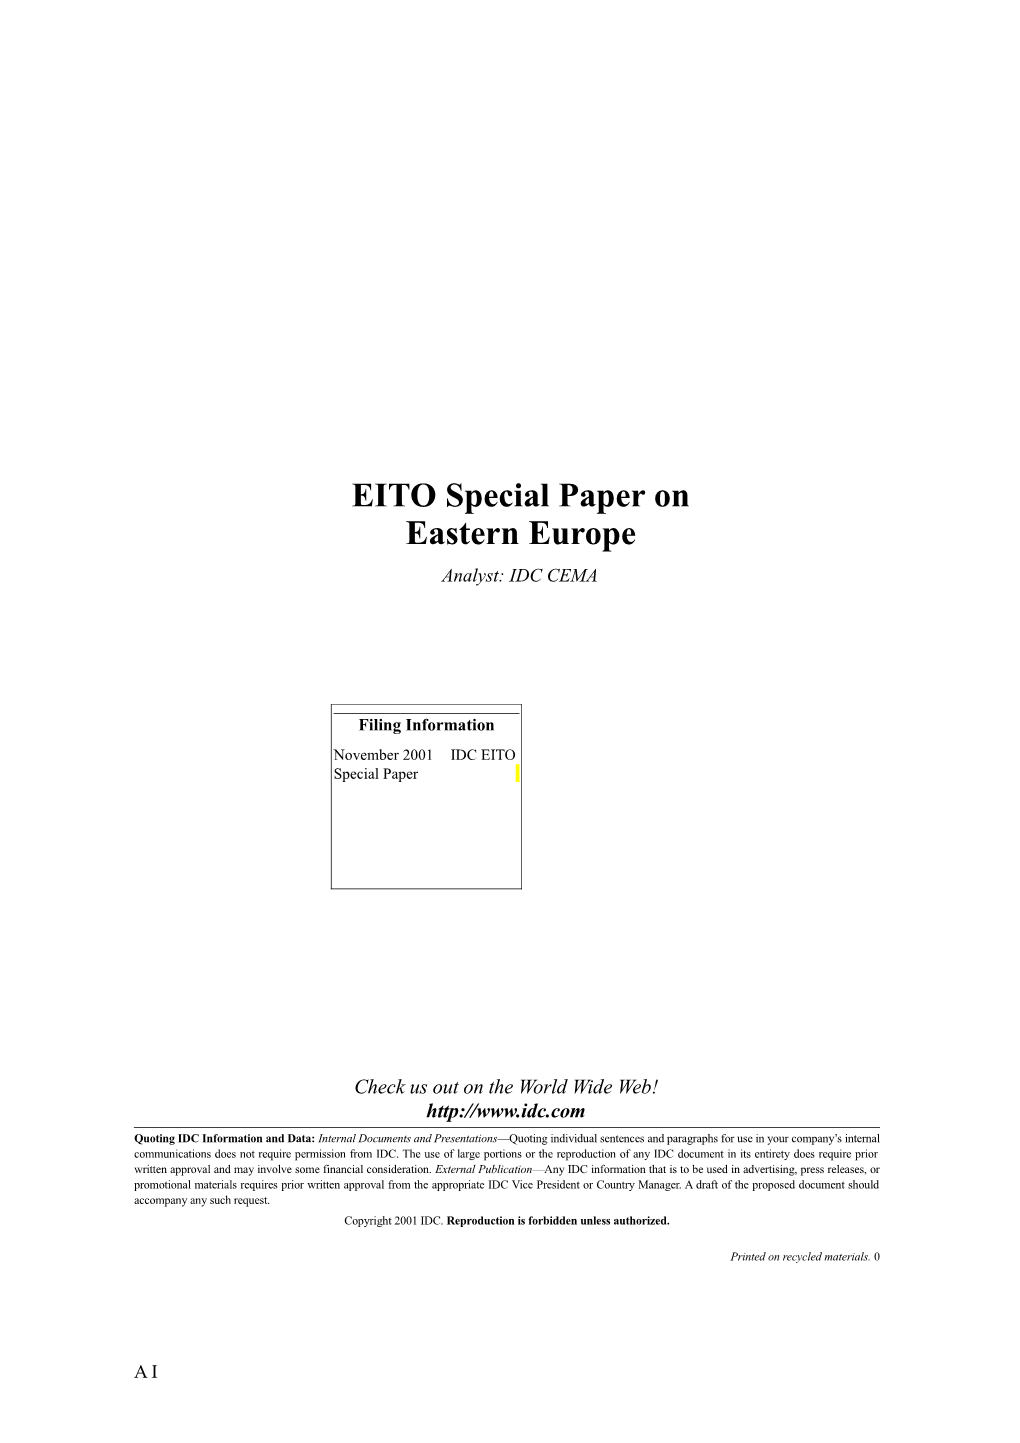 EITO Special Paper on Eastern Europe